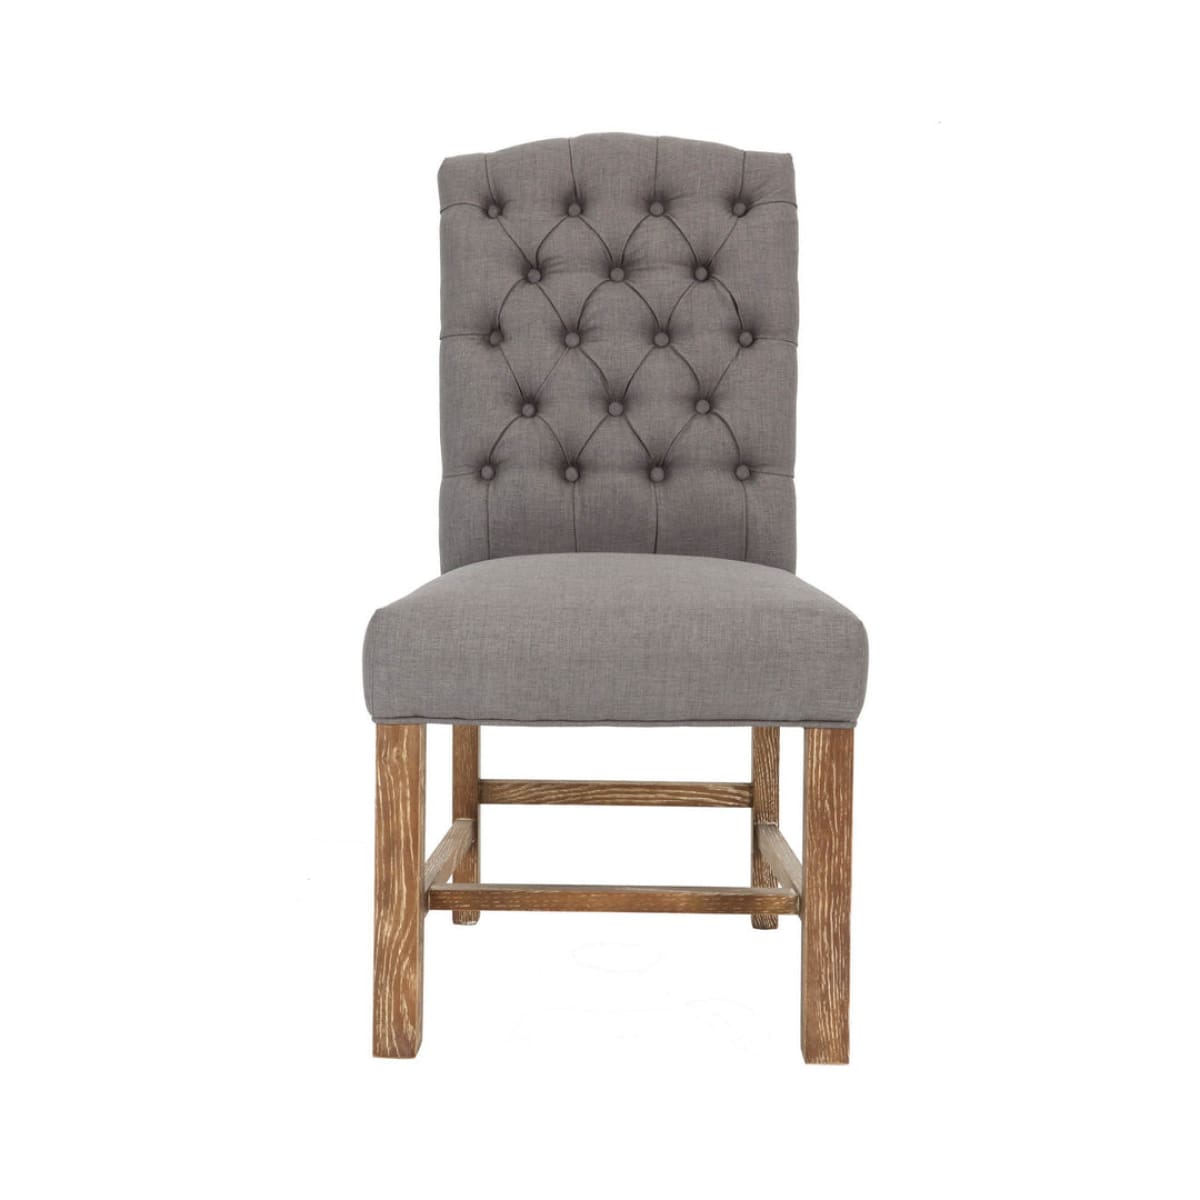 York Dining Chair - Charcoal Grey & Natural Legs - lh-import-dining-chairs